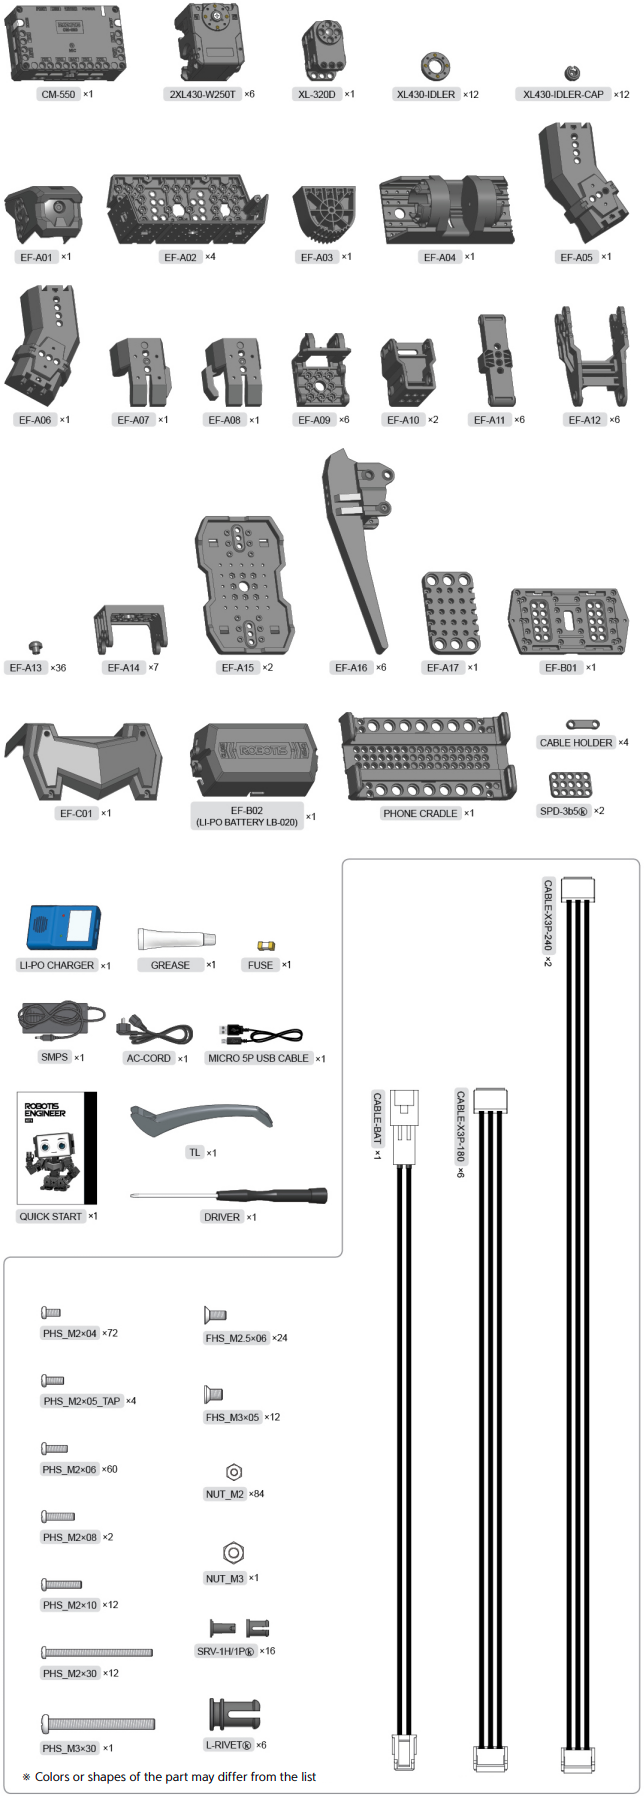 Contents of the Robotis Engineer Kit 2